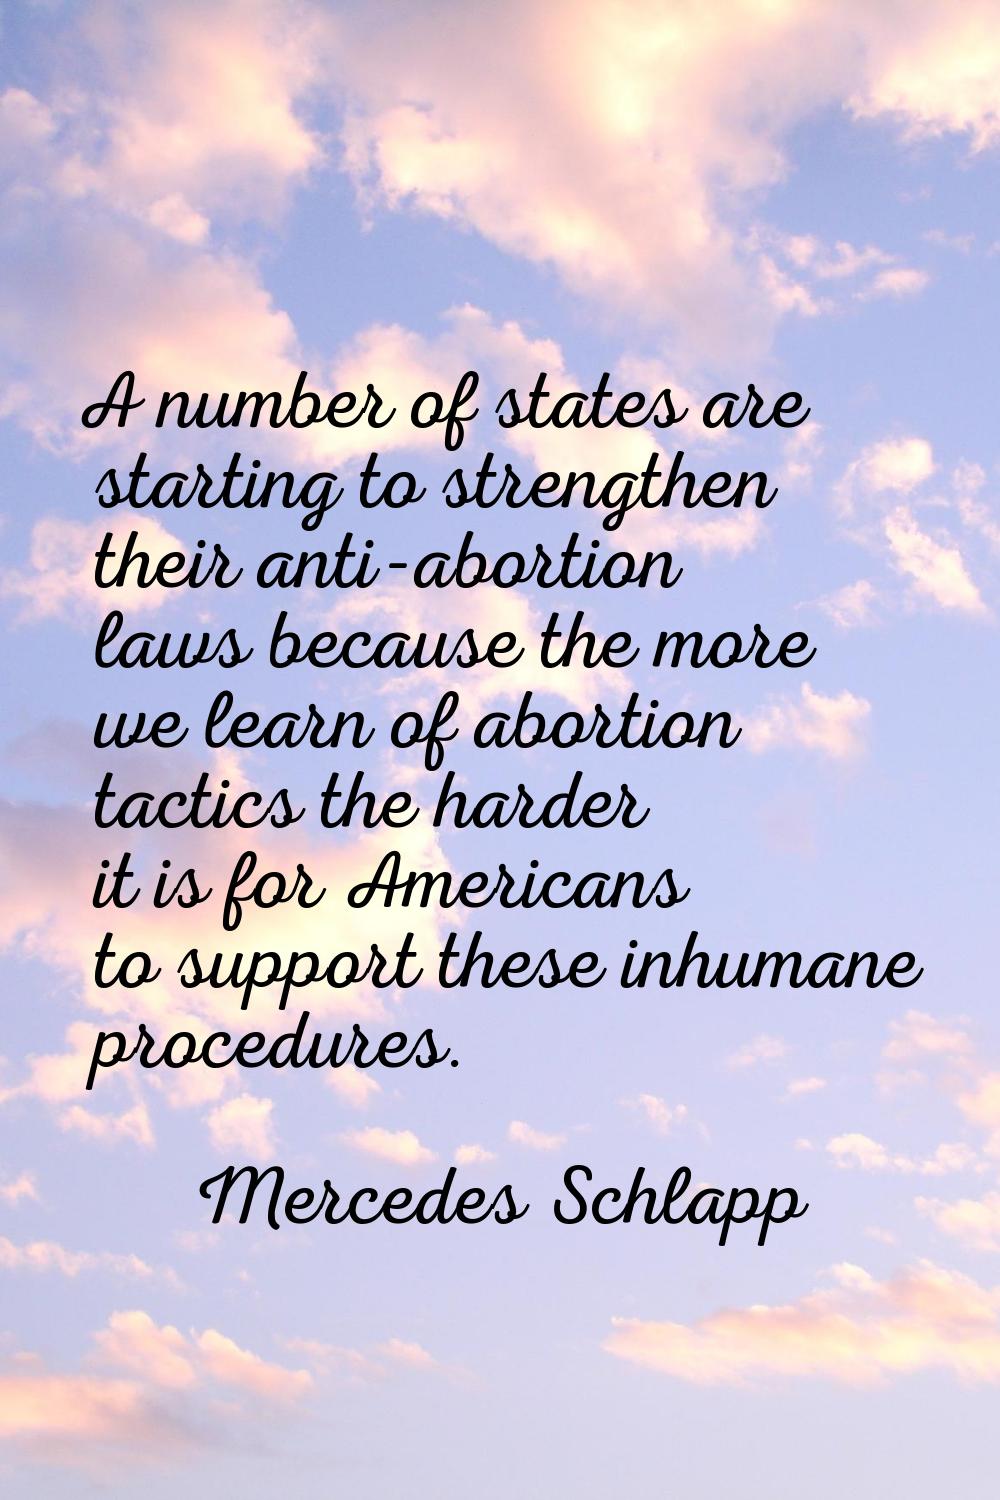 A number of states are starting to strengthen their anti-abortion laws because the more we learn of